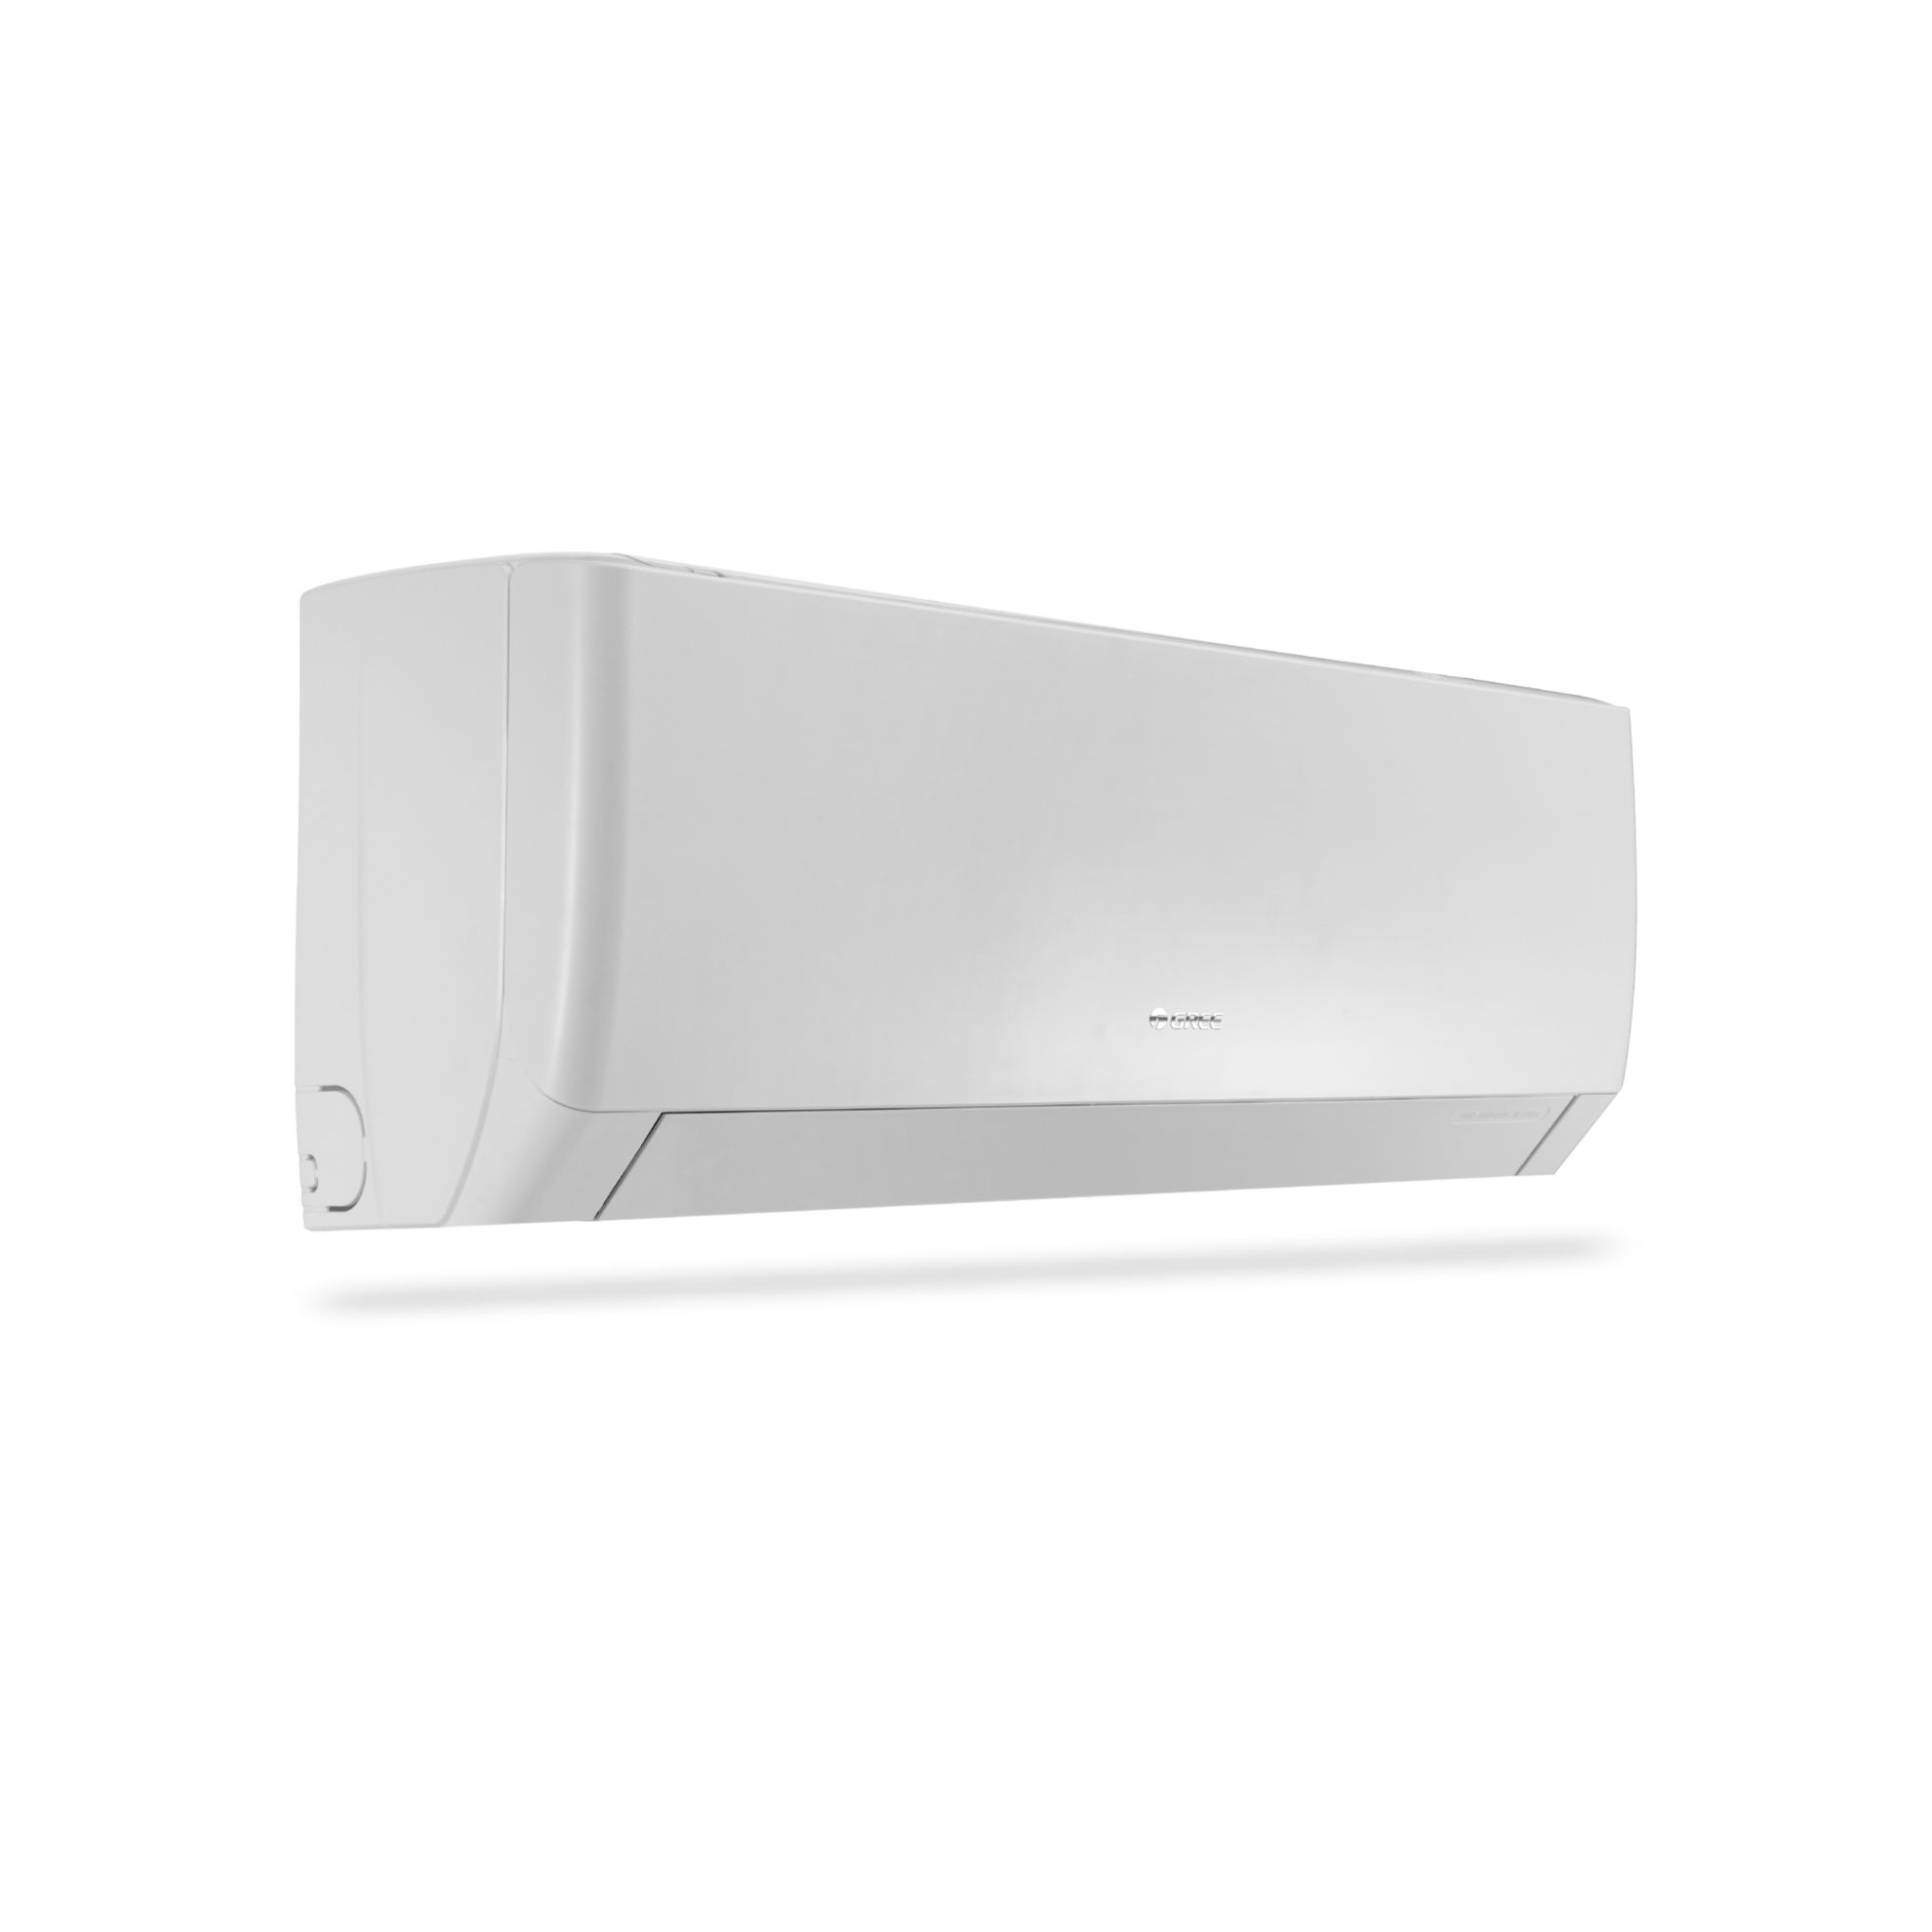 Picture of Gree - iSAVE PLUS-P30H3 - 2.5 Ton|Inverter|Wall Split AC